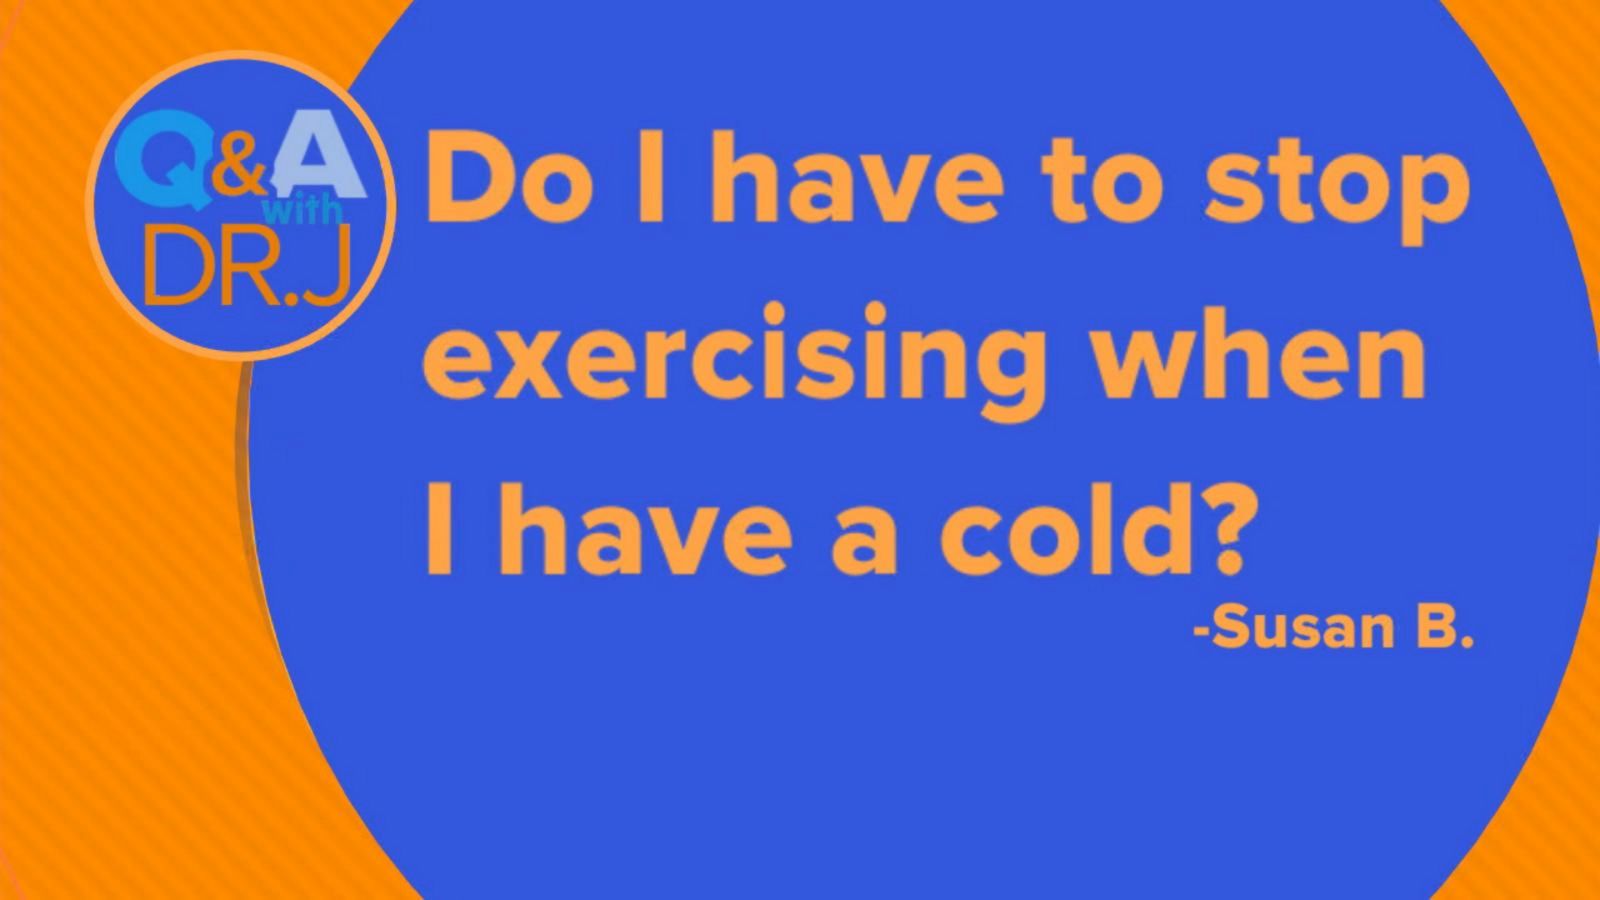 Can i exercise when i have a cold